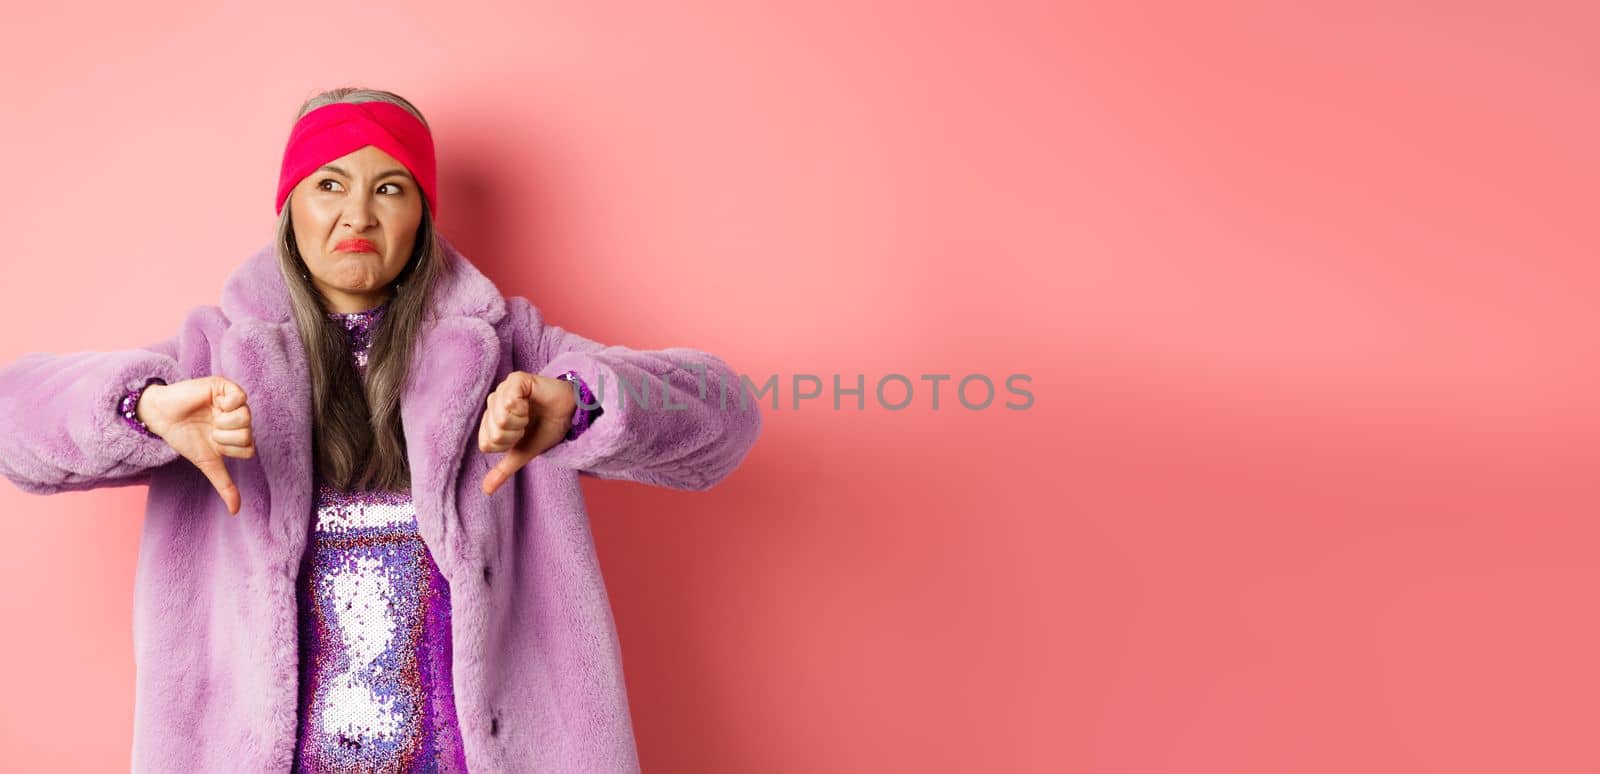 Fashion and shopping concept. Disappointed stylish senior woman showing thumbs-down, looking displeased and judgemental, being dissatisfied, standing over pink background.